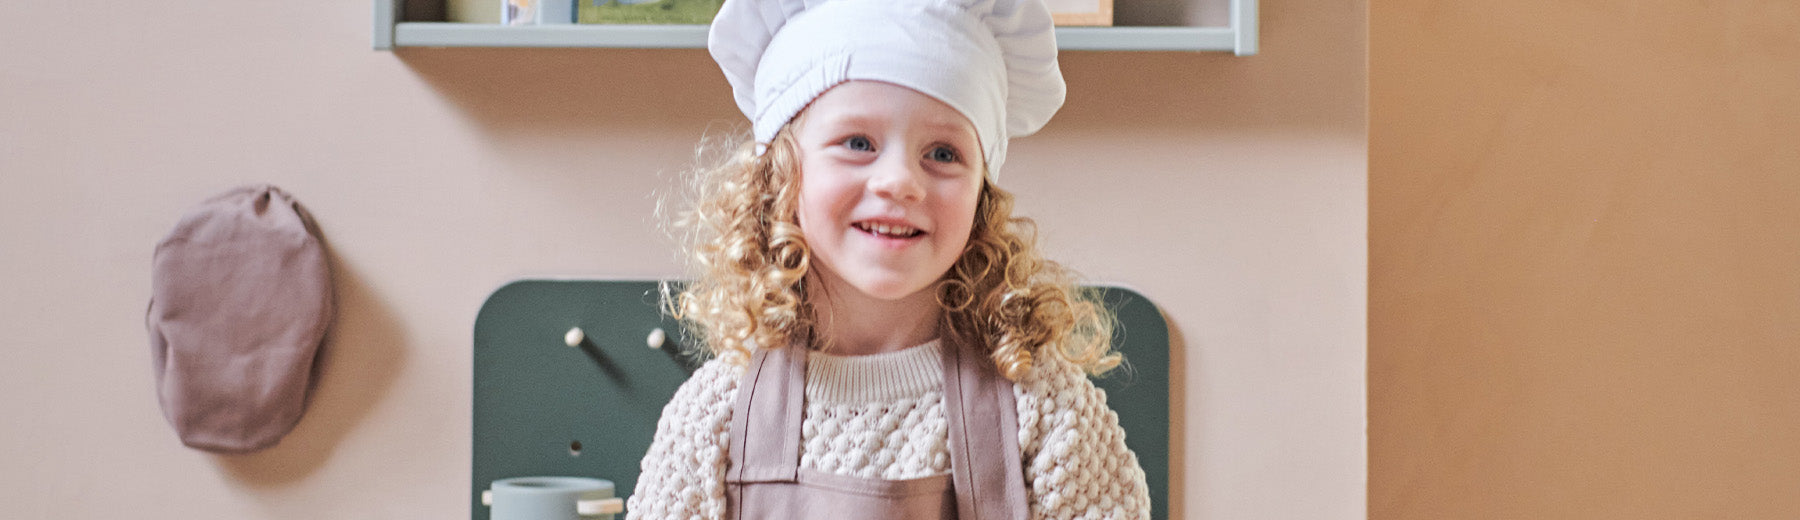 Girl is dressed up in a chef costume from FLEXA